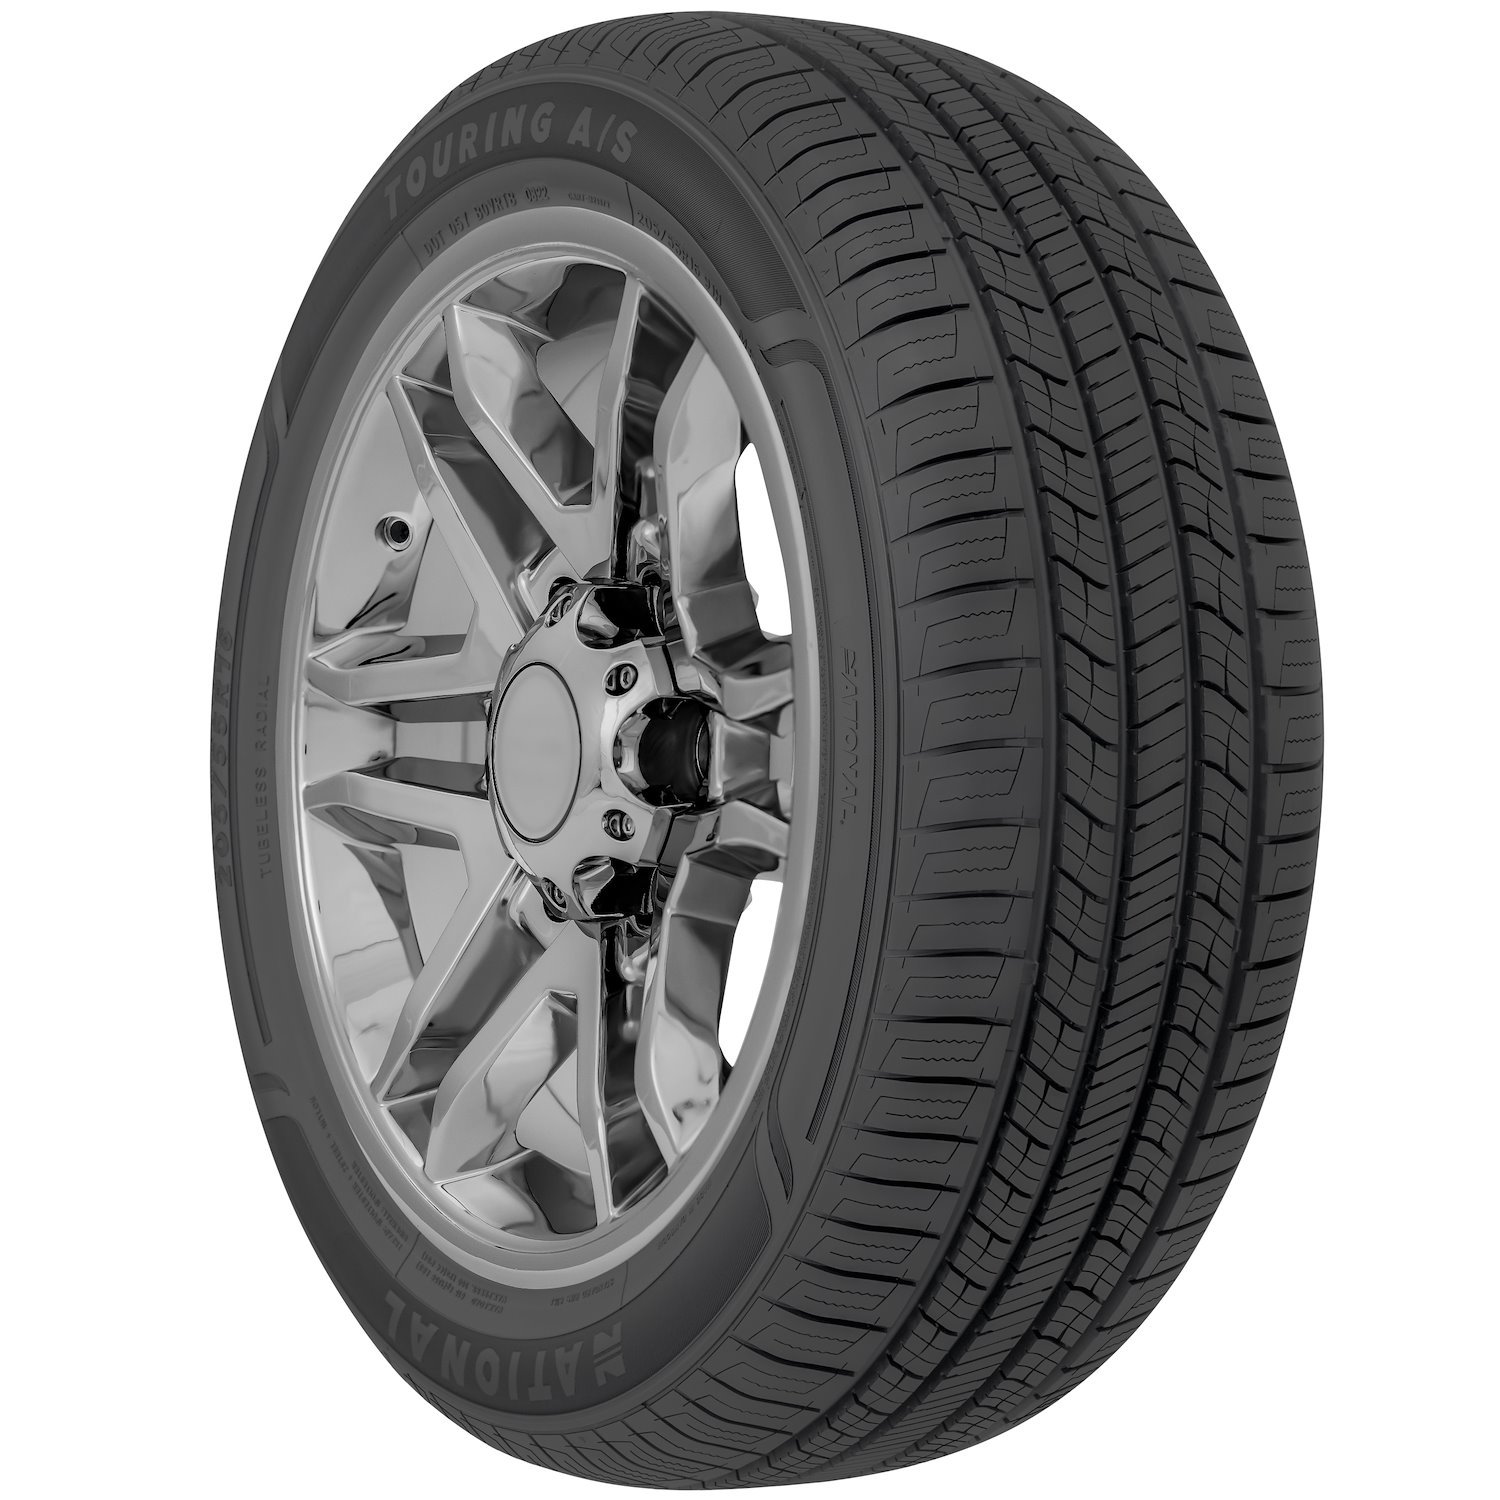 NLR54 Touring A/S Tire, 205/65R16